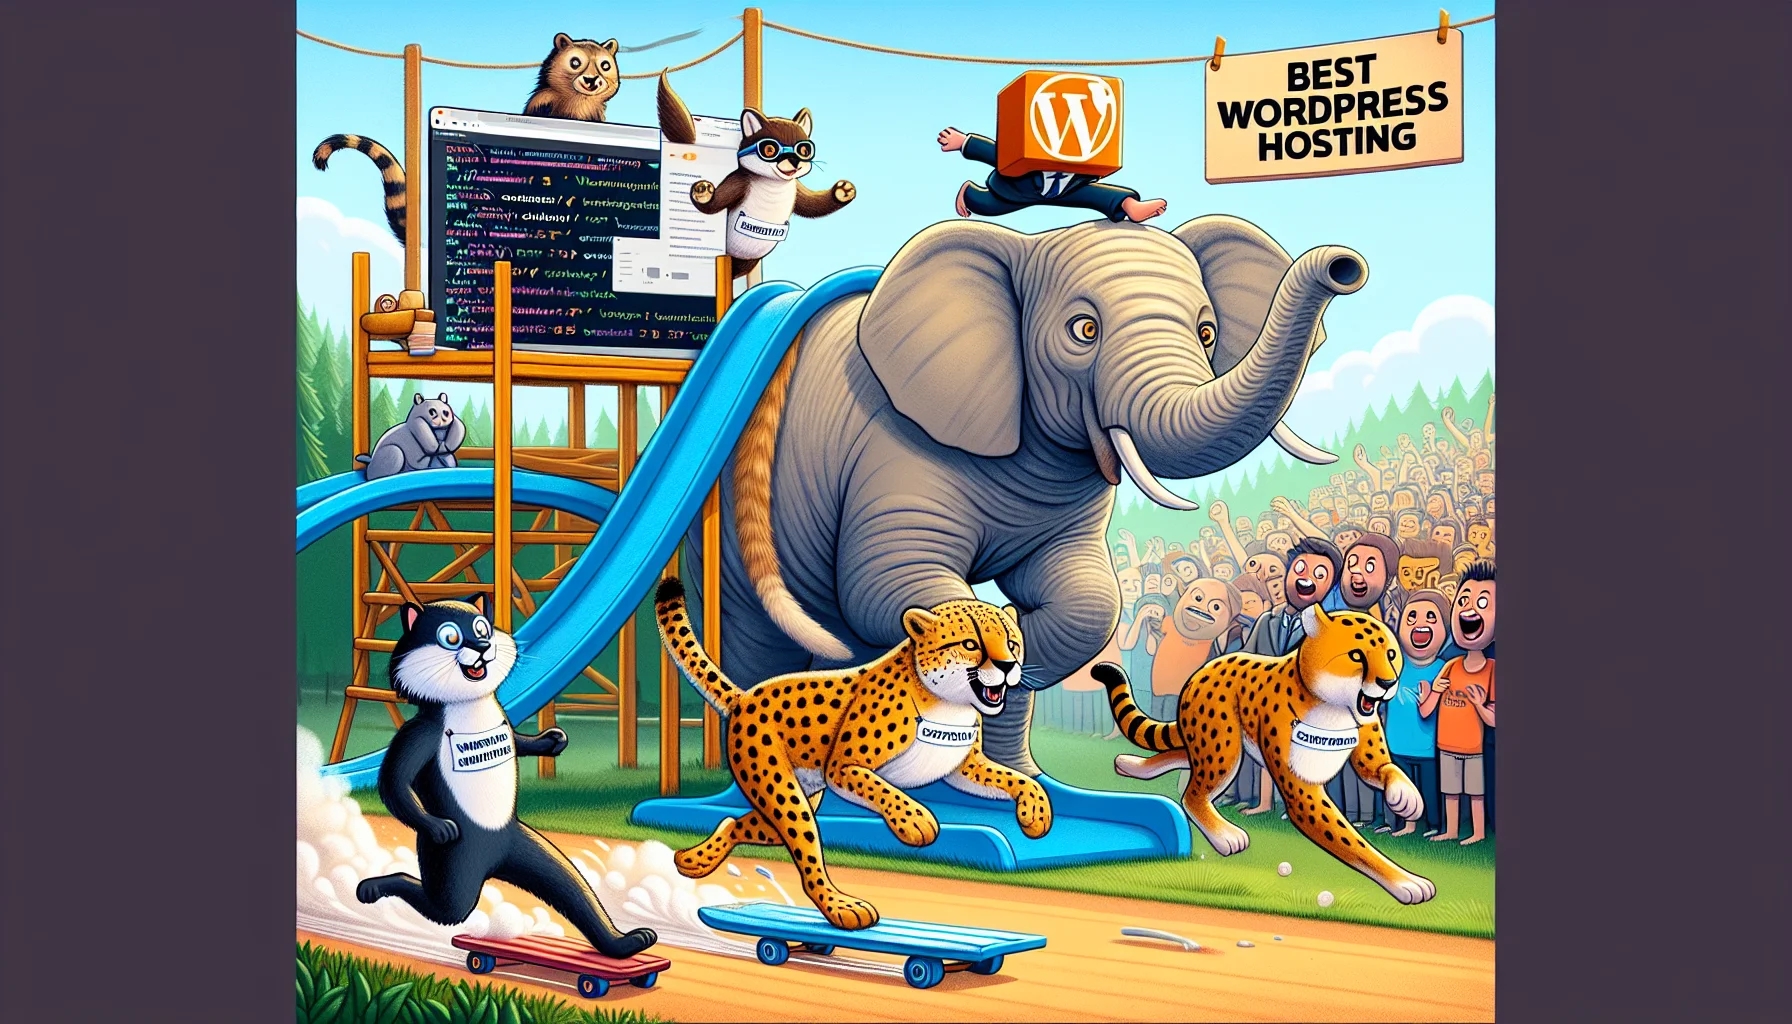 Create a humorous scene featuring anthropomorphic animals, each representing different aspects of WordPress hosting. A slick otter represents user-friendly interfaces, a sturdy elephant signifies reliable uptime, and a speedy cheetah stands for quick plugin installation. They are all racing, with the elephant balancing a website on its trunk, the otter sliding on a slide made of code, and the cheetah sprinting with a plug-in icon in its paw. In the background, a crowd of various other animals cheer them on. A hanging sign reads 'Best WordPress Hosting'. Add a faux Reddit upvote button hanging from a tree, subtly implying that this is from a Reddit discussion.